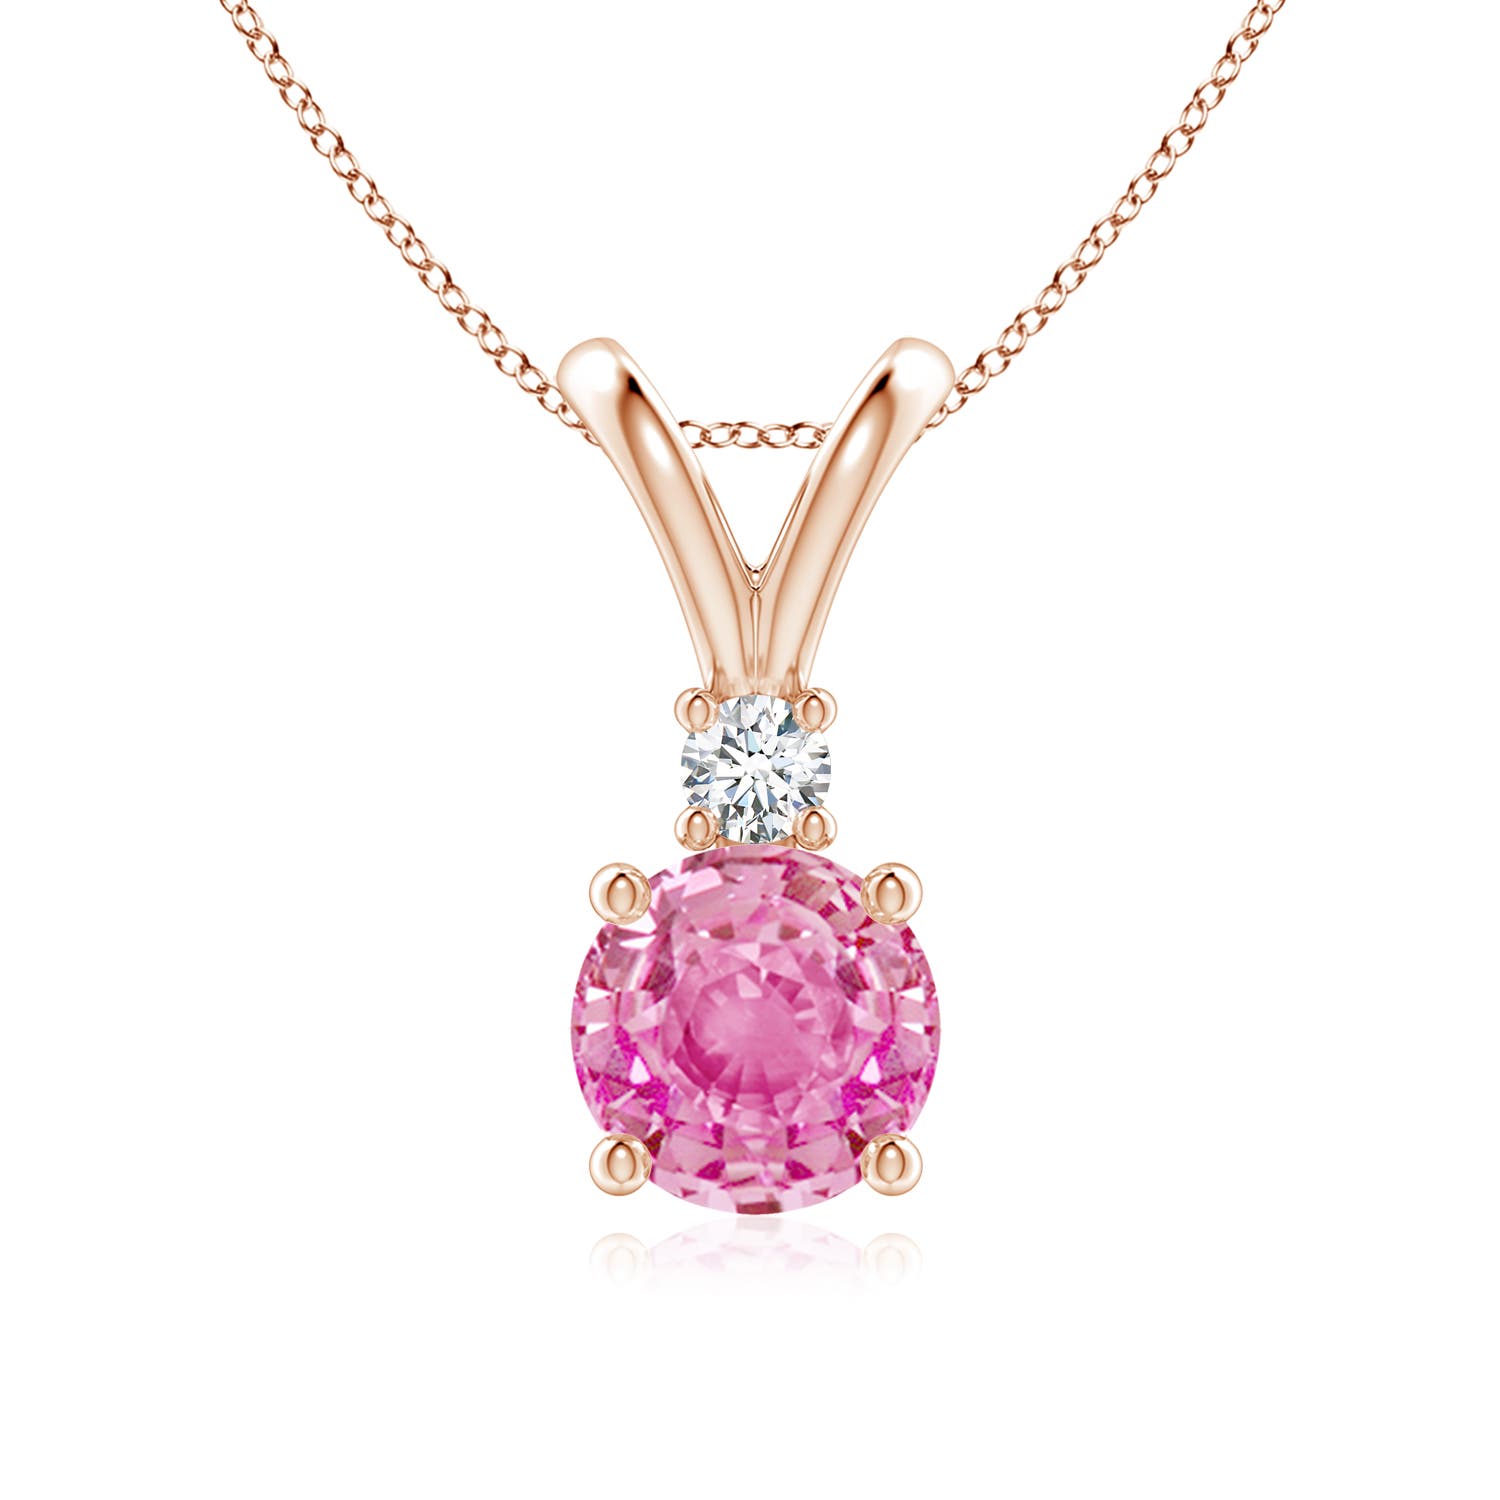 AA - Pink Sapphire / 1.67 CT / 14 KT Rose Gold